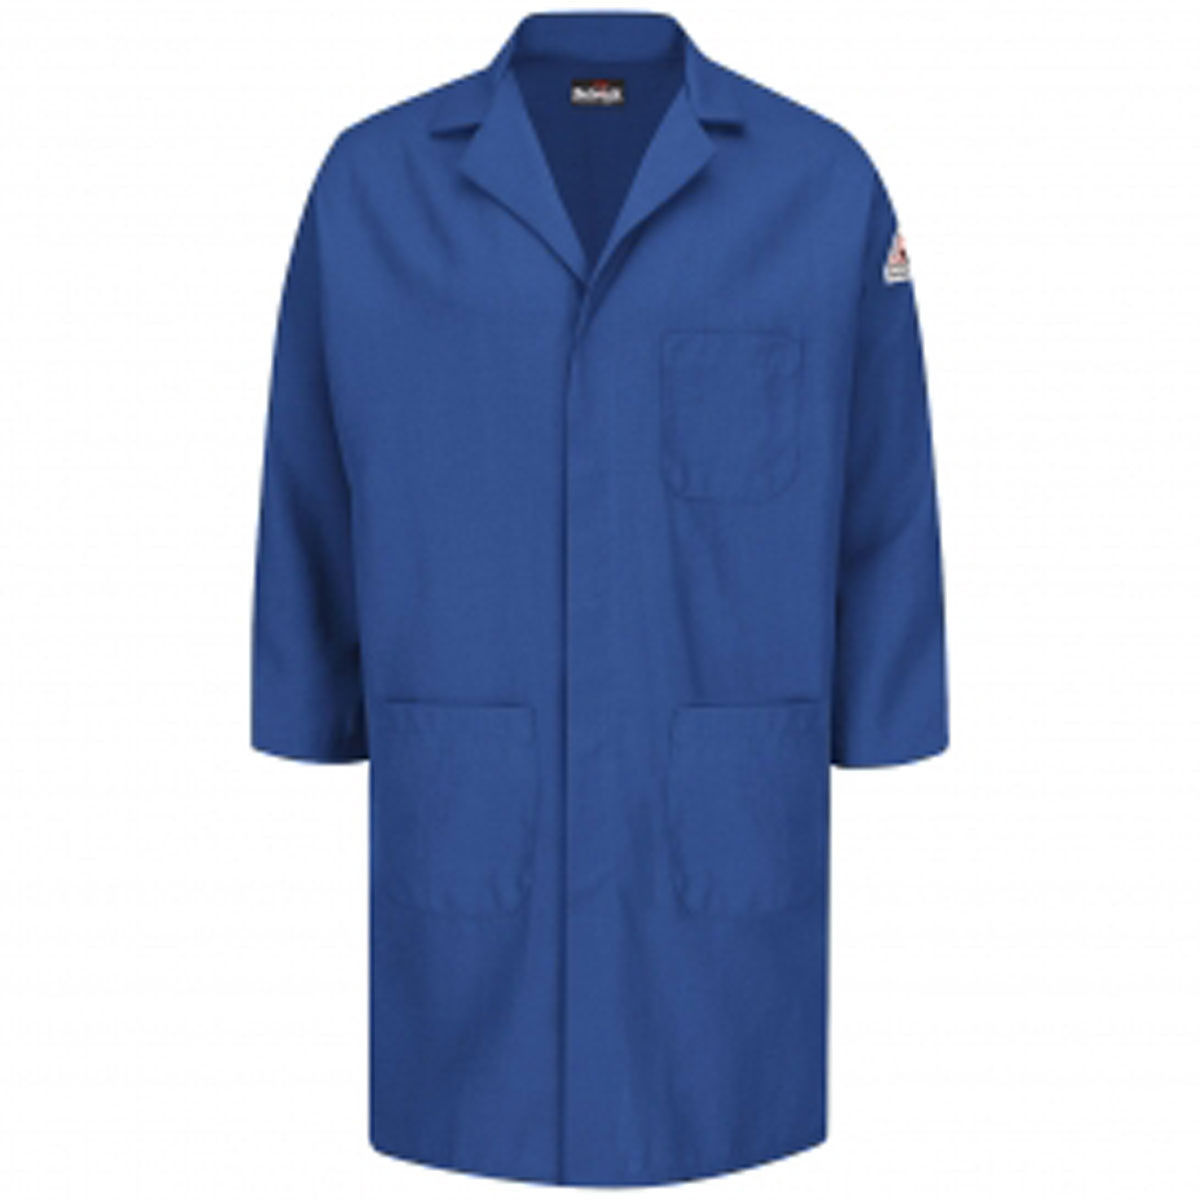 Does this Bulwark KNL6RB lab coat have pockets?